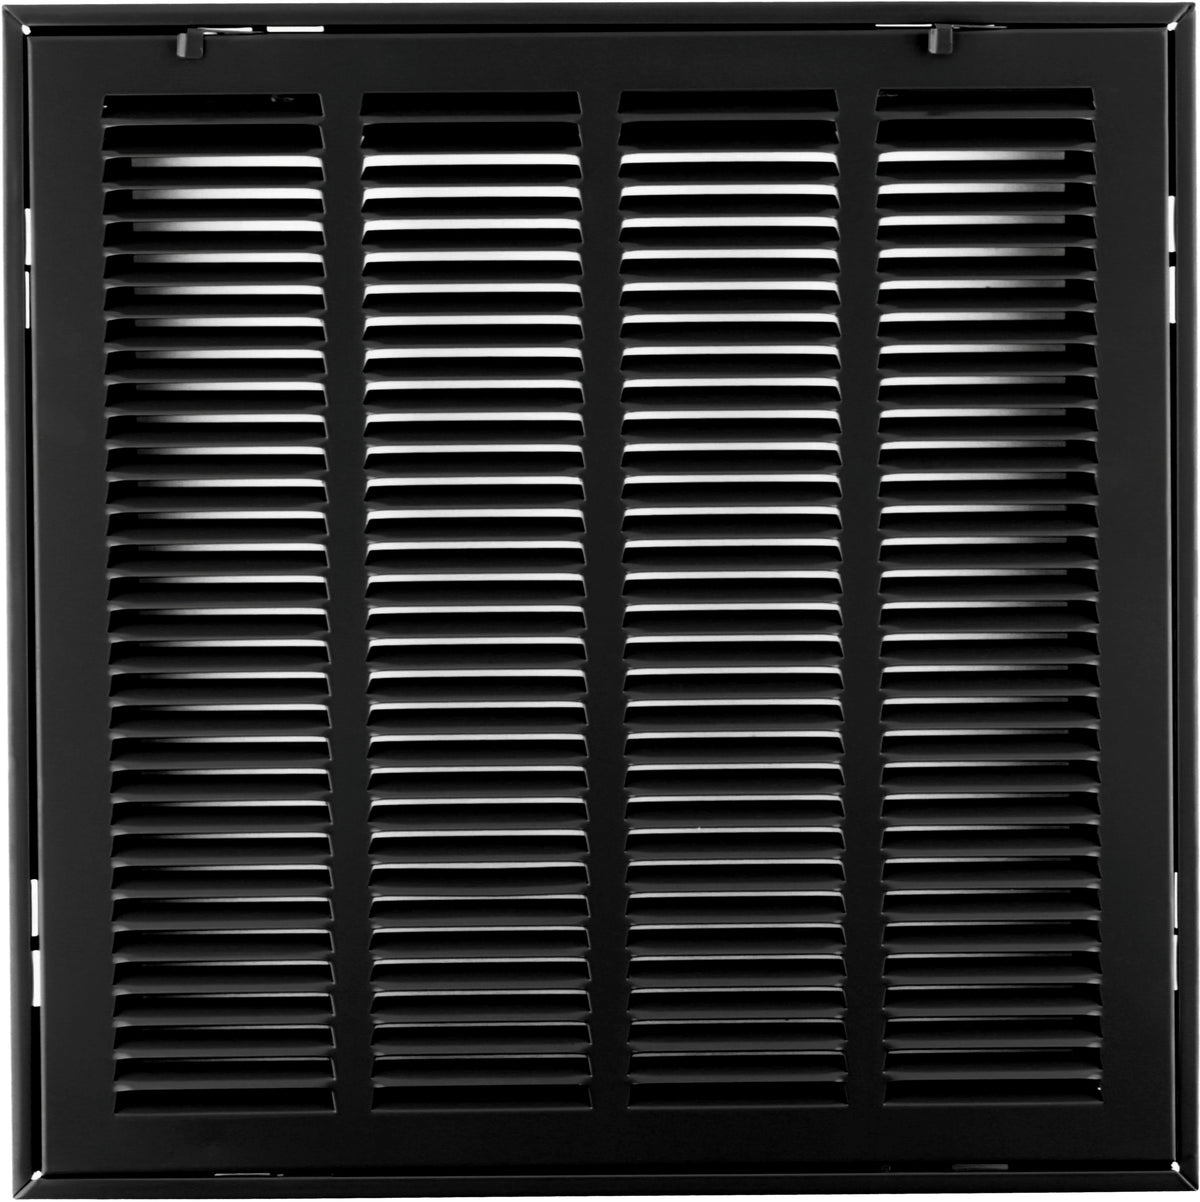 14&quot; X 14&quot; Steel Return Air Filter Grille for 1&quot; Filter - Removable Frame - Black - [Outer Dimensions: 16 5/8&quot; X 16 5/8&quot;]